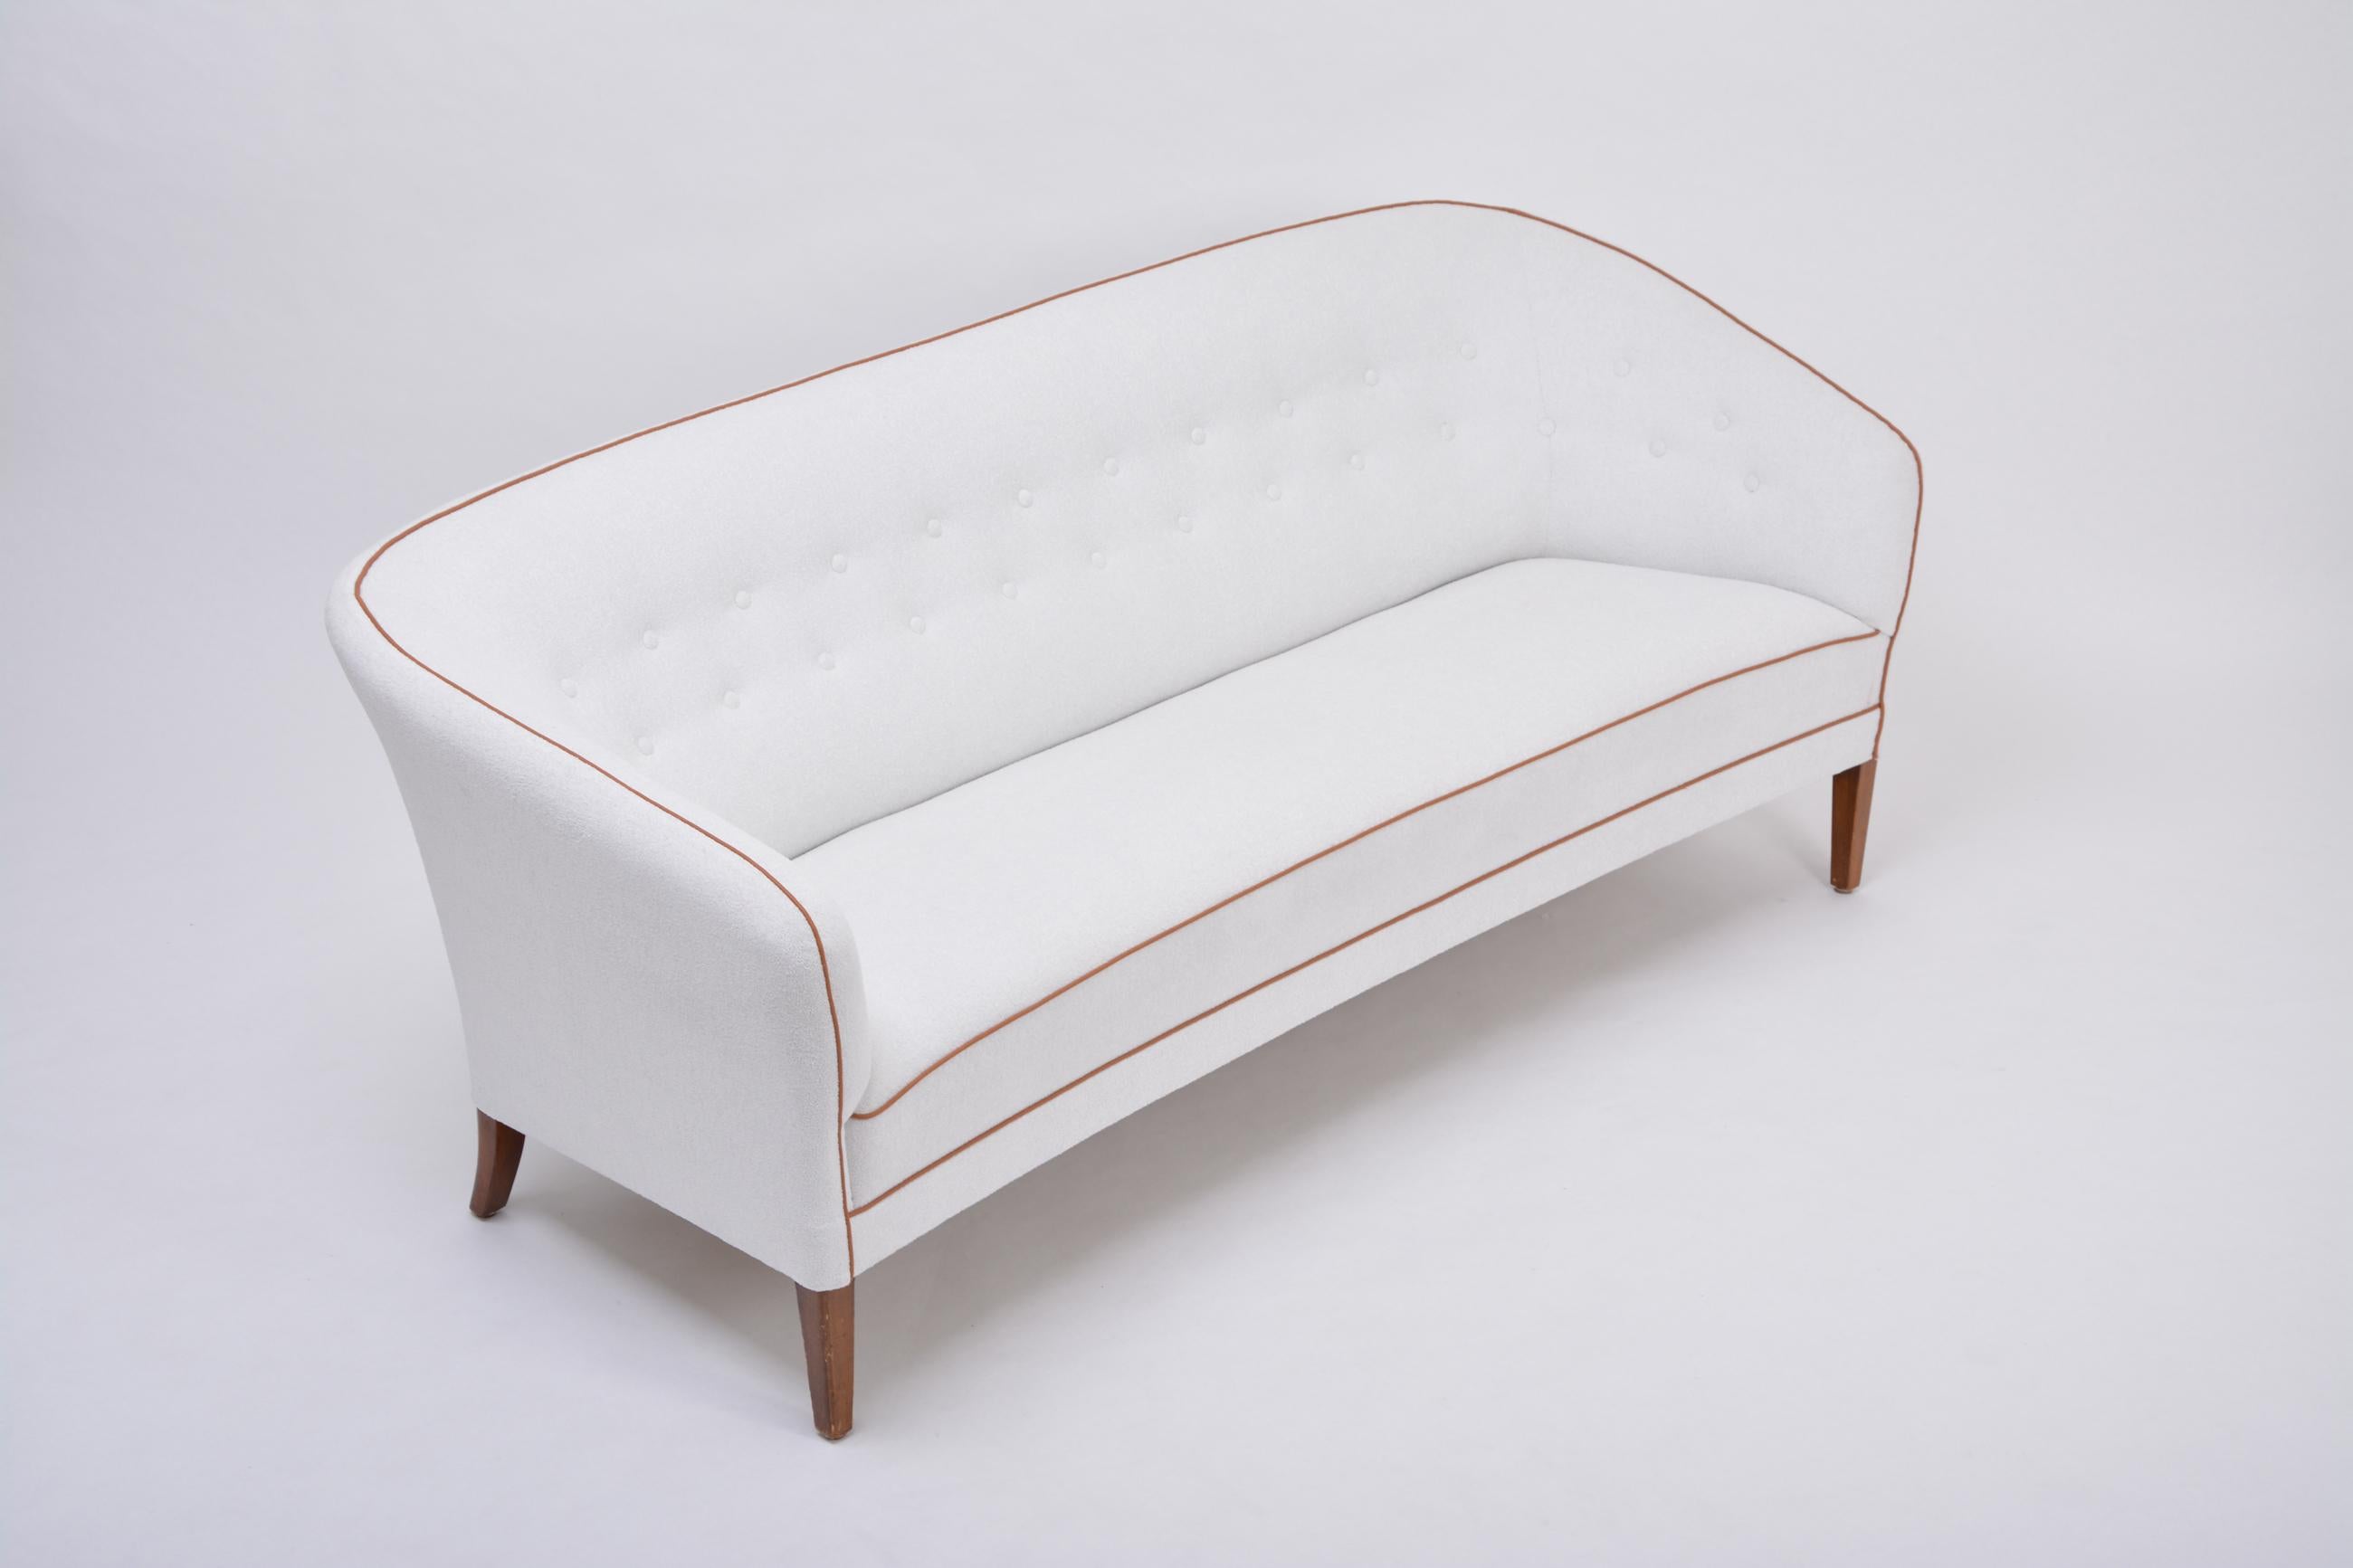 Reupholstered Danish Mid-Century Modern three-seat sofa by Ludvig Pontoppidan

Gorgeous three-seat sofa with elegant curves designed and produced by Danish master craftsman Ludvig Pontoppidan. The sofa is in excellent condition, as it has been